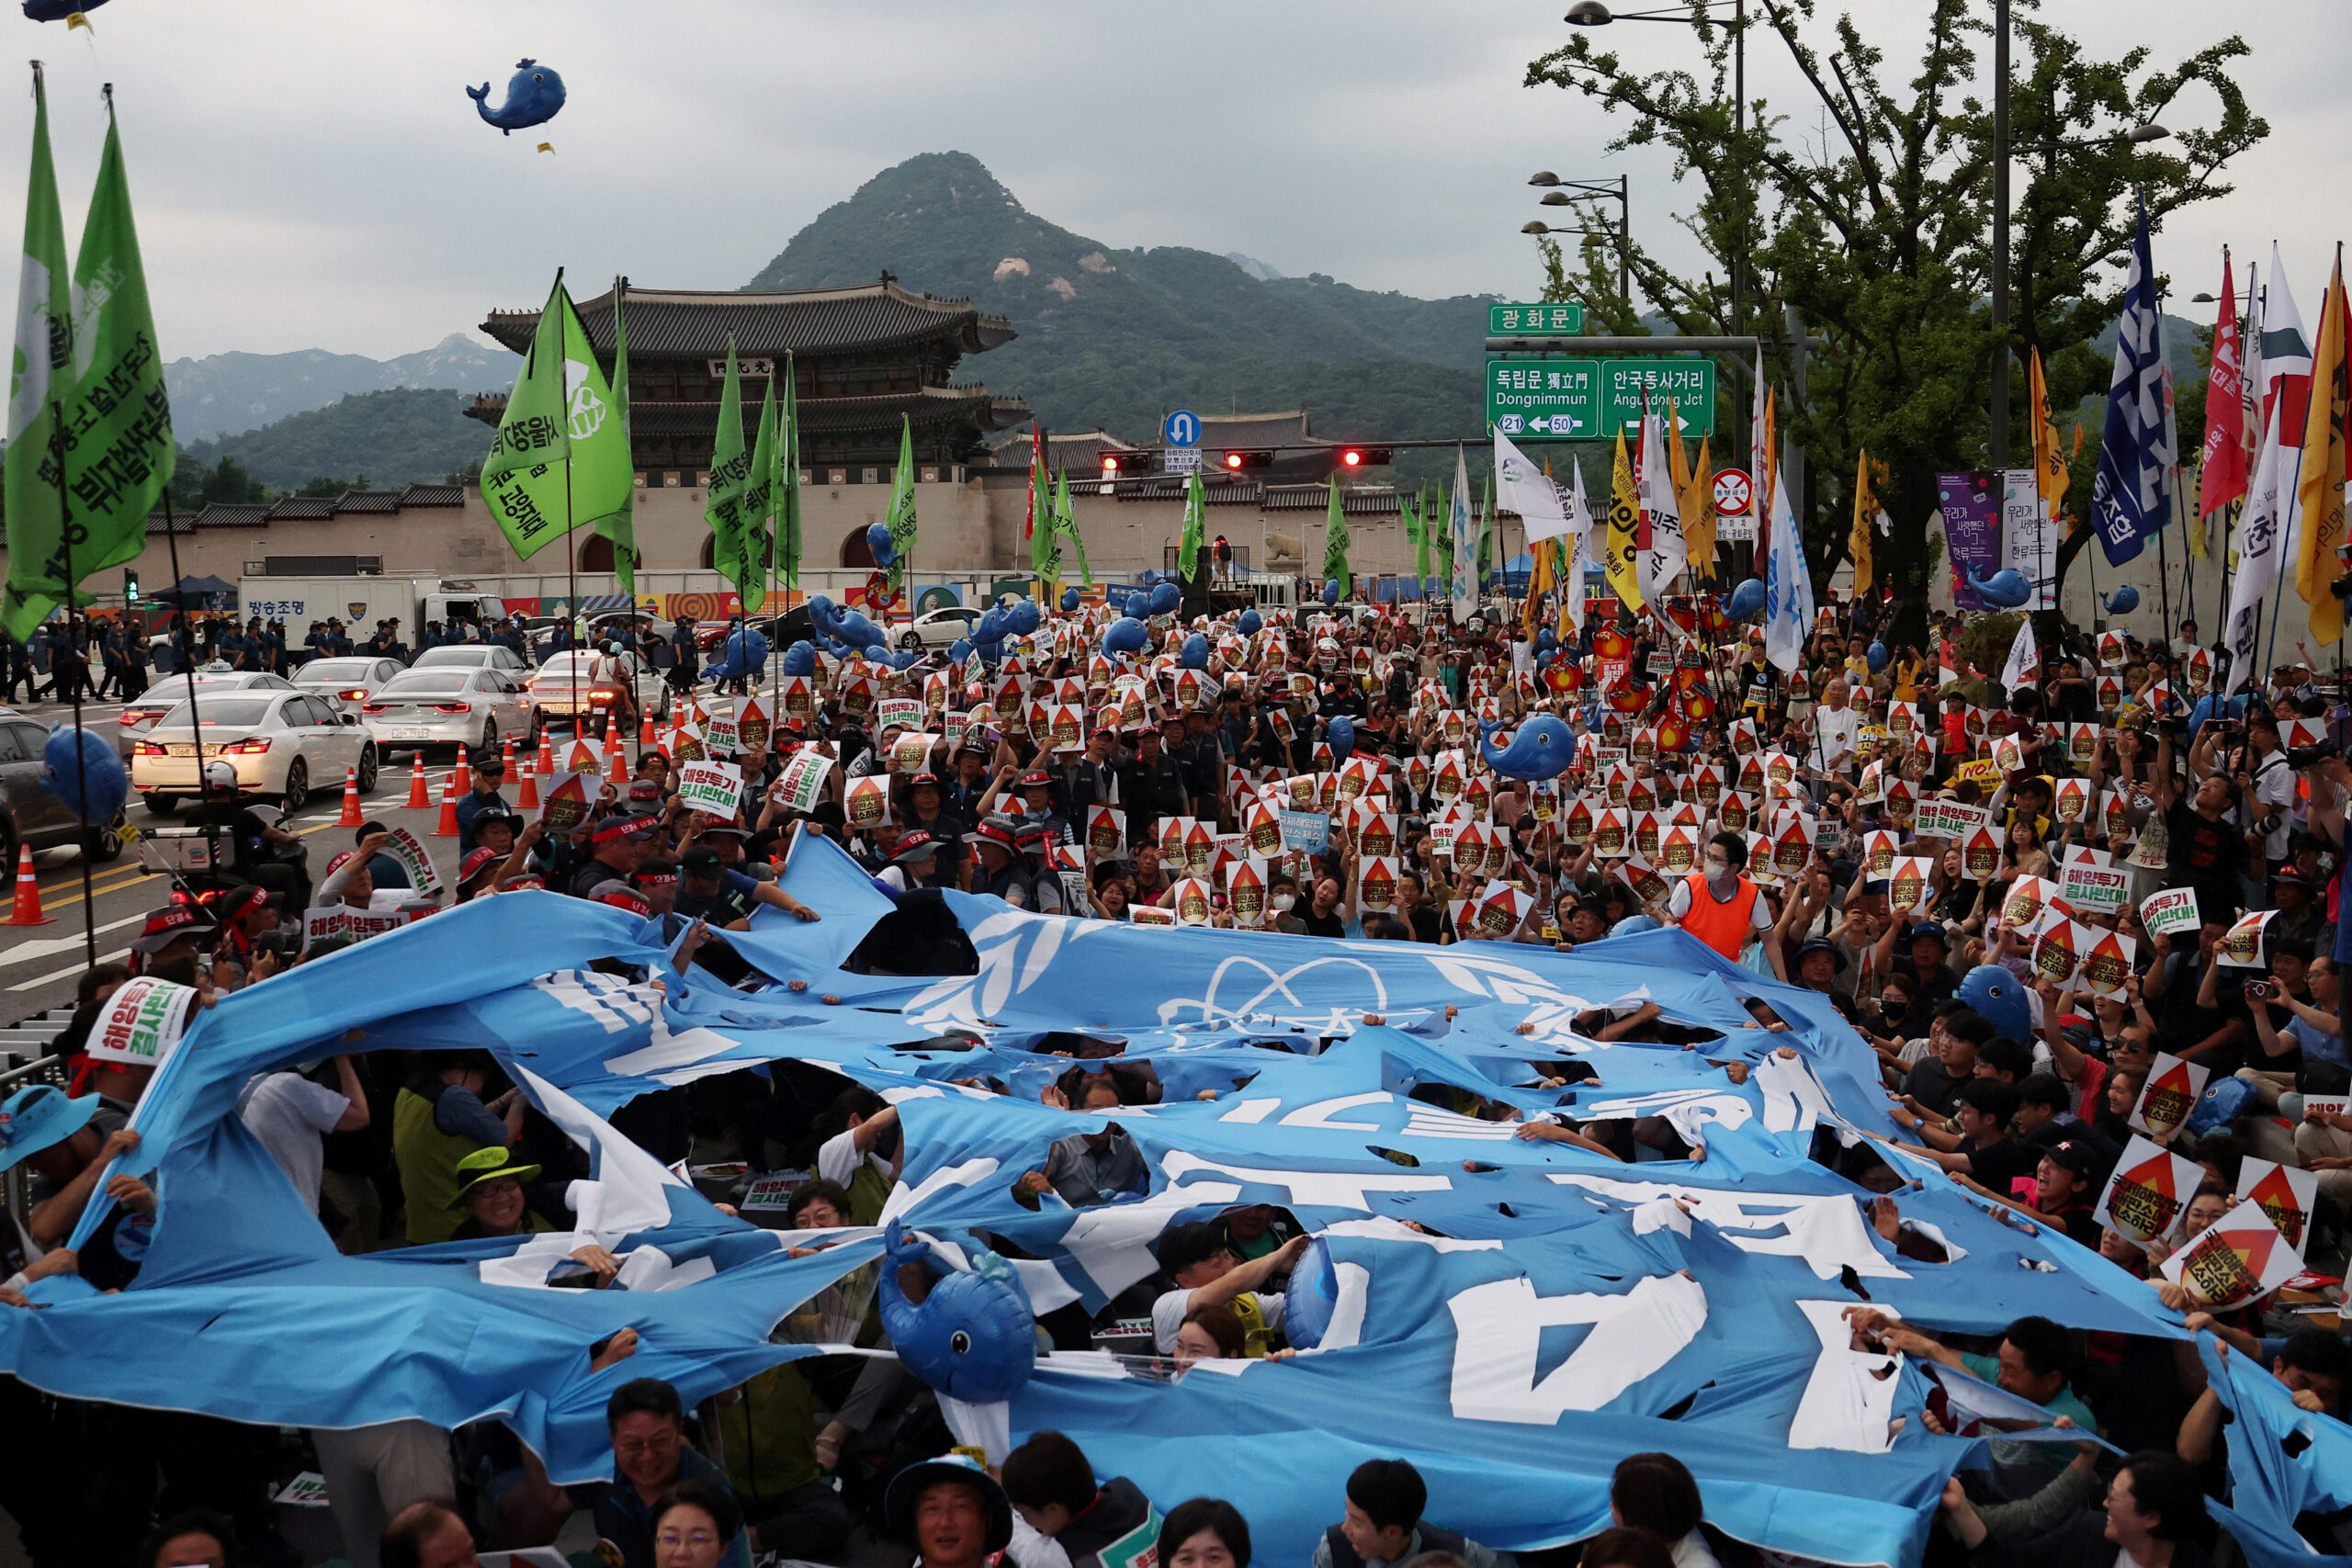 South Korean people tear up a giant banner depicting the logo of the International Atomic Energy Agency (IAEA) during a protest against Japan's plan to discharge treated radioactive water from the tsunami-wrecked Fukushima plant into the ocean, in central Seoul, South Korea, July 8, 2023. REUTERS/Kim Hong-Ji/File Photo